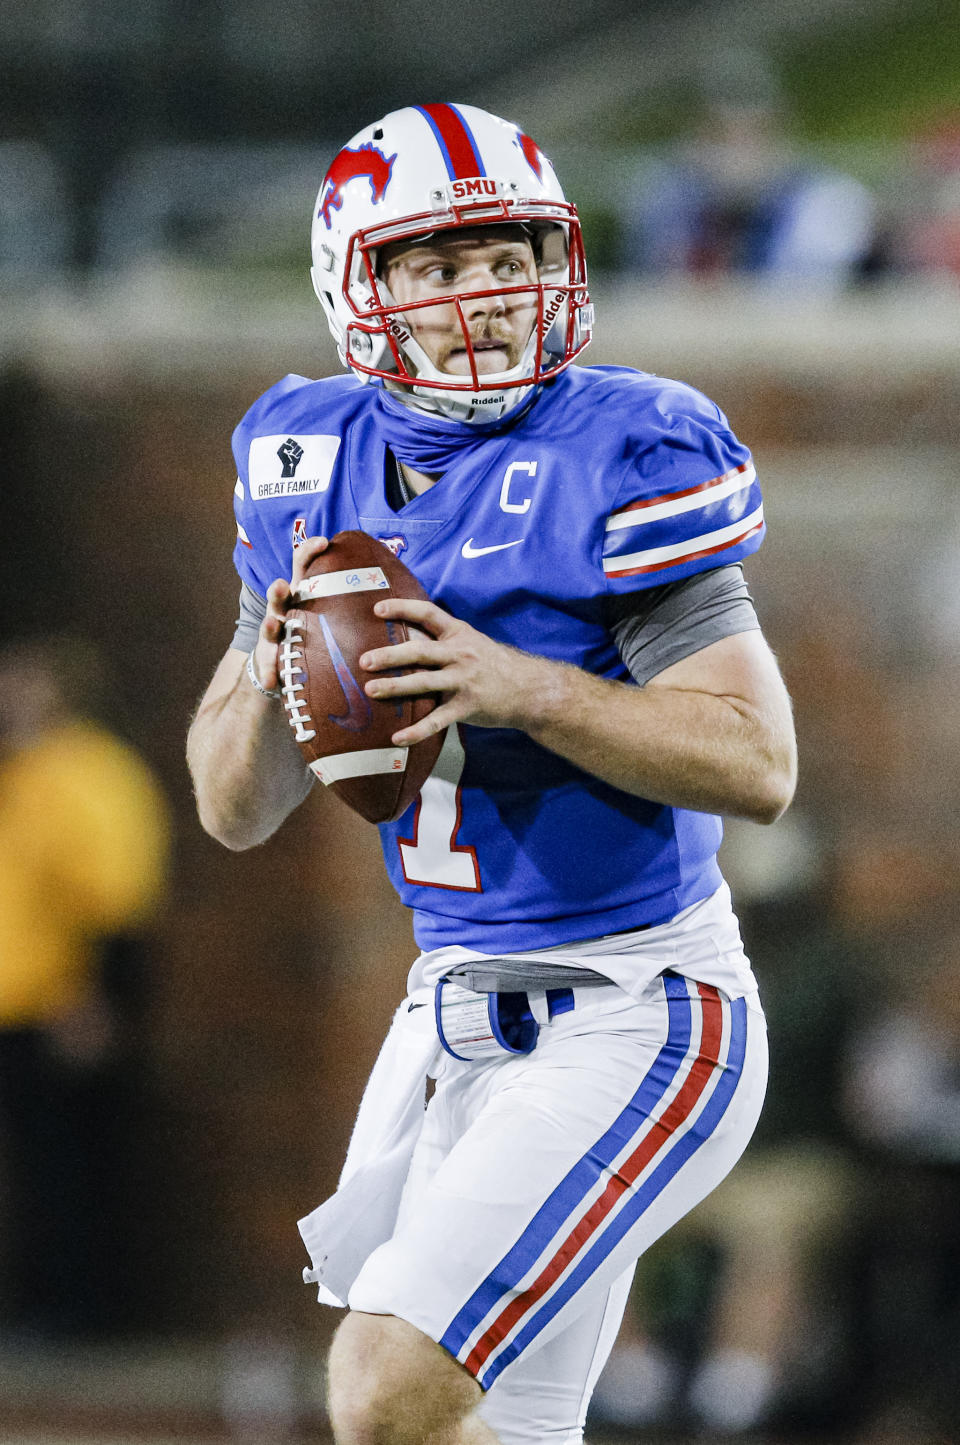 SMU quarterback Shane Buechele (7) looks for an open receiver during the first half of an NCAA college football game against Navy, Saturday, Oct. 31, 2020, in Dallas. (AP Photo/Brandon Wade)